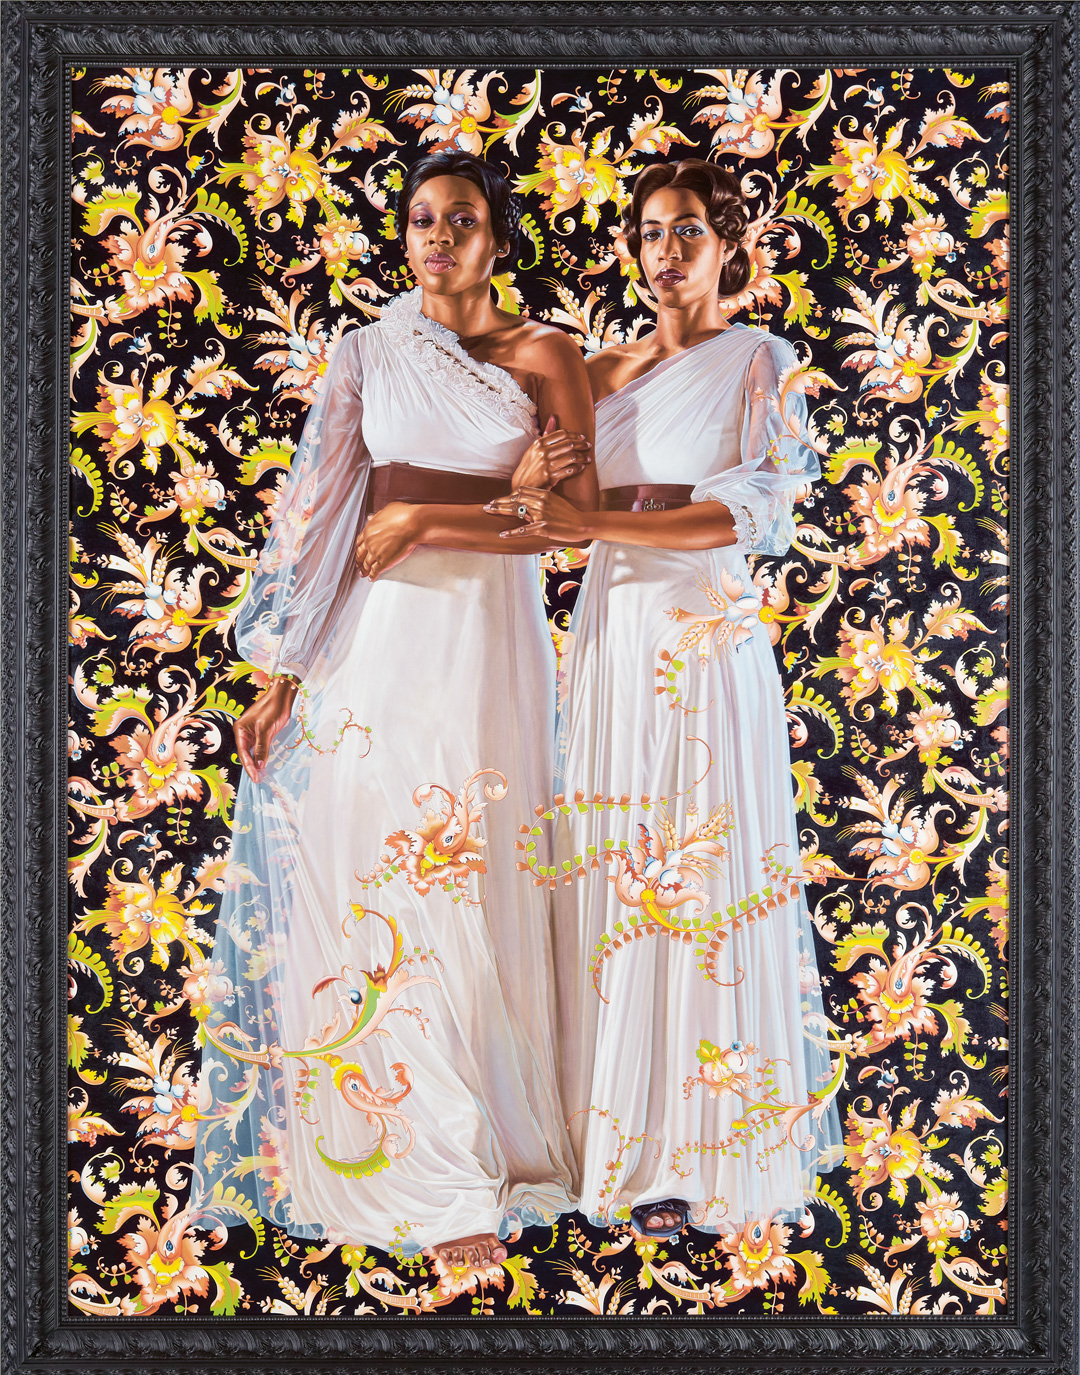 Two Sisters (2012) by Kehinde Wiley, as featured in The Artist Project